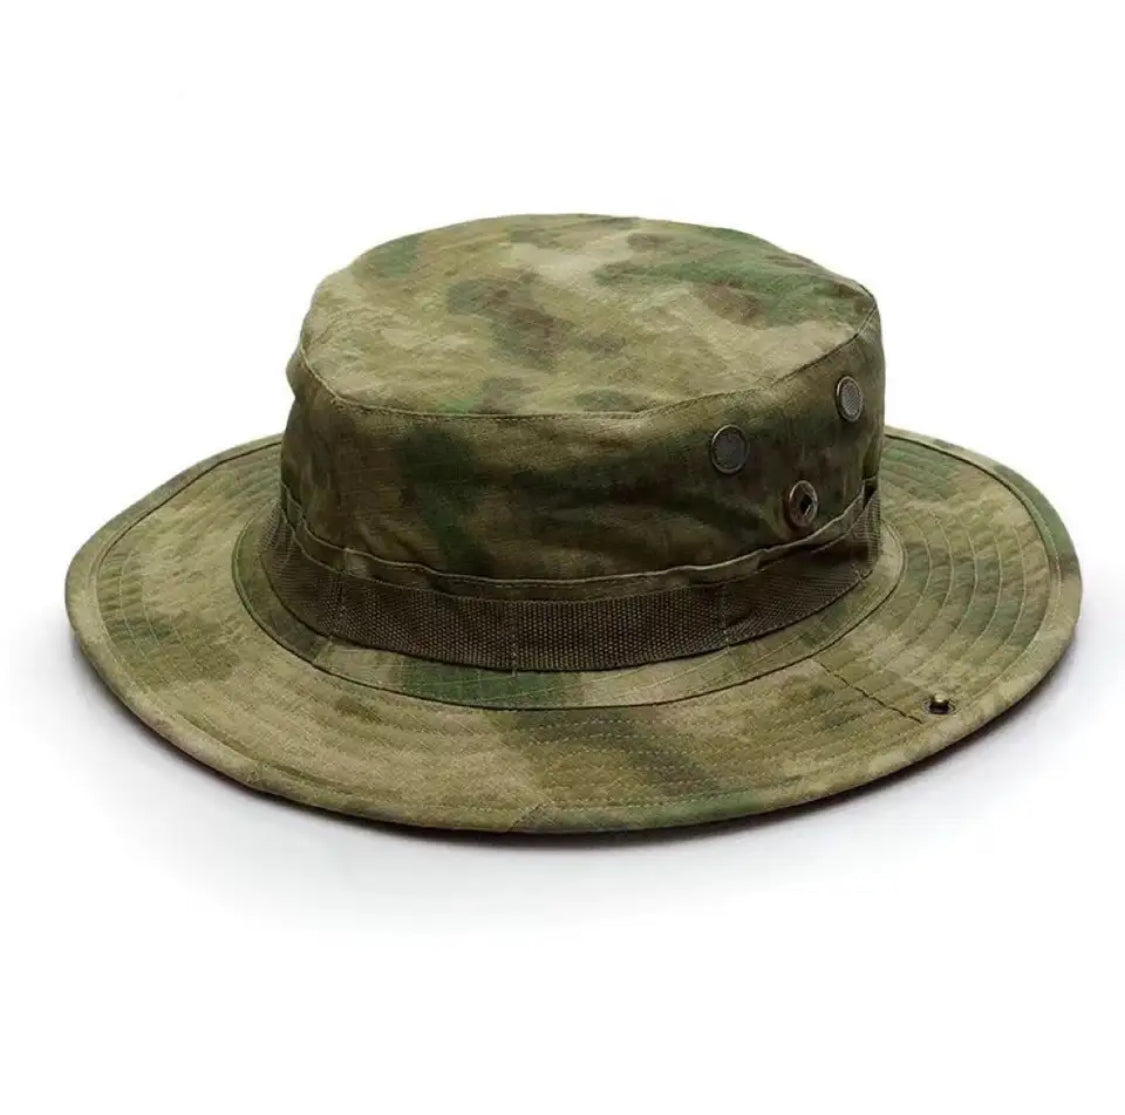 Tactical Camouflage Boonie Hat, UV Protection